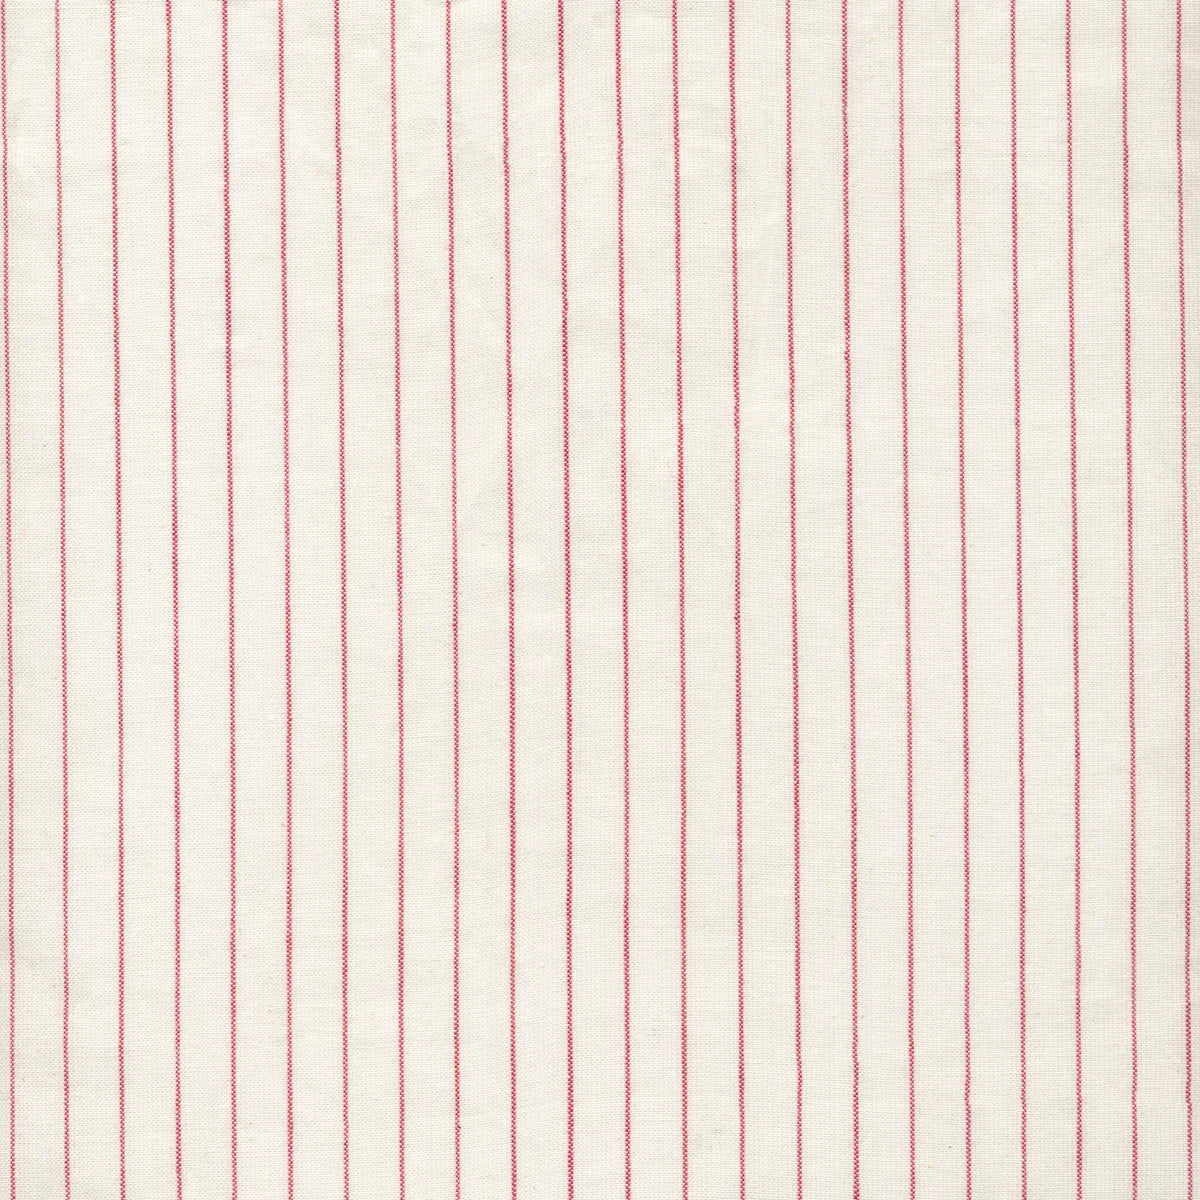 Fabric #14949 12 Isabella Wovens - Cream & Red